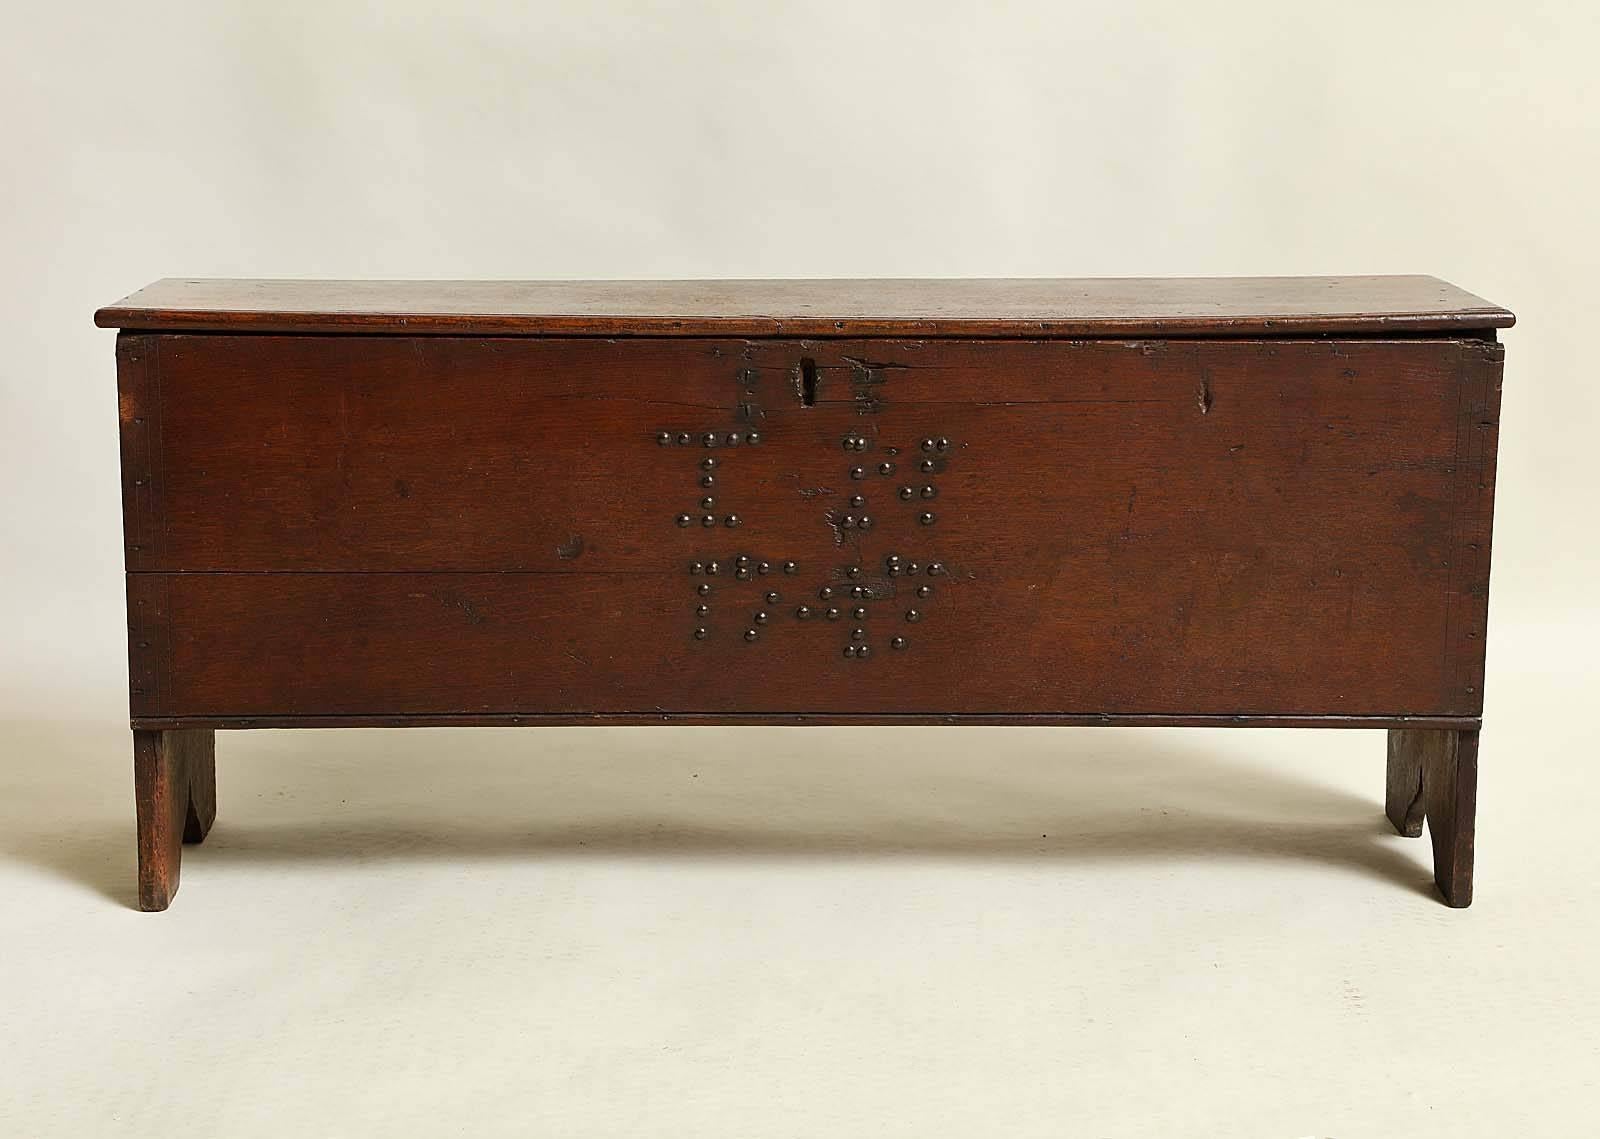 Good 18th century English oak six plank chest, the simple top with original iron strap hinges and lock hasp over bootjack sides having arched feet and scroll carving, the front decorated with brass tacks forming the date of 1747.